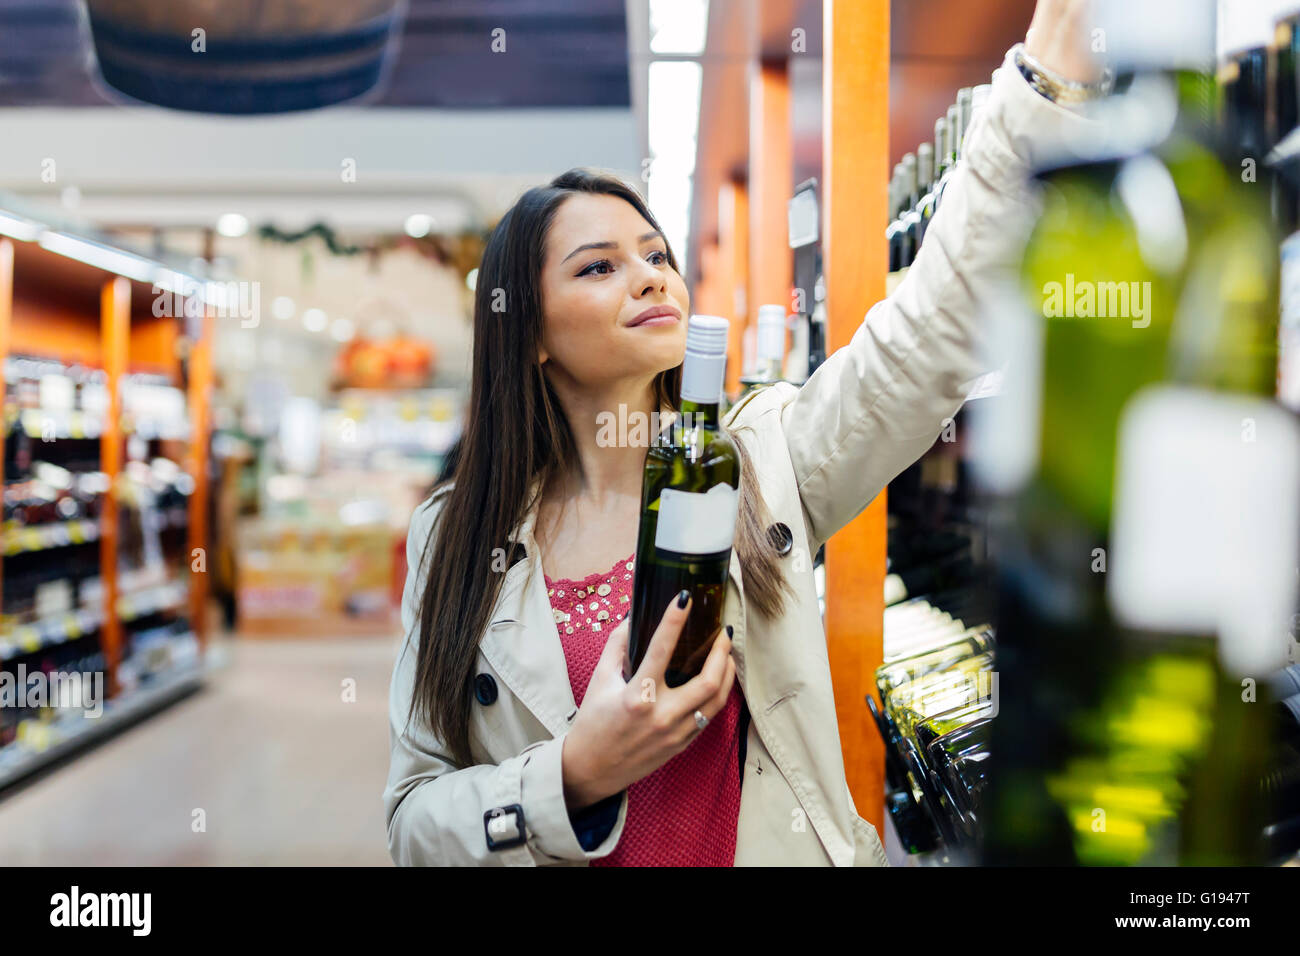 Woman deciding what wine to buy and shopping in supermarket Stock Photo